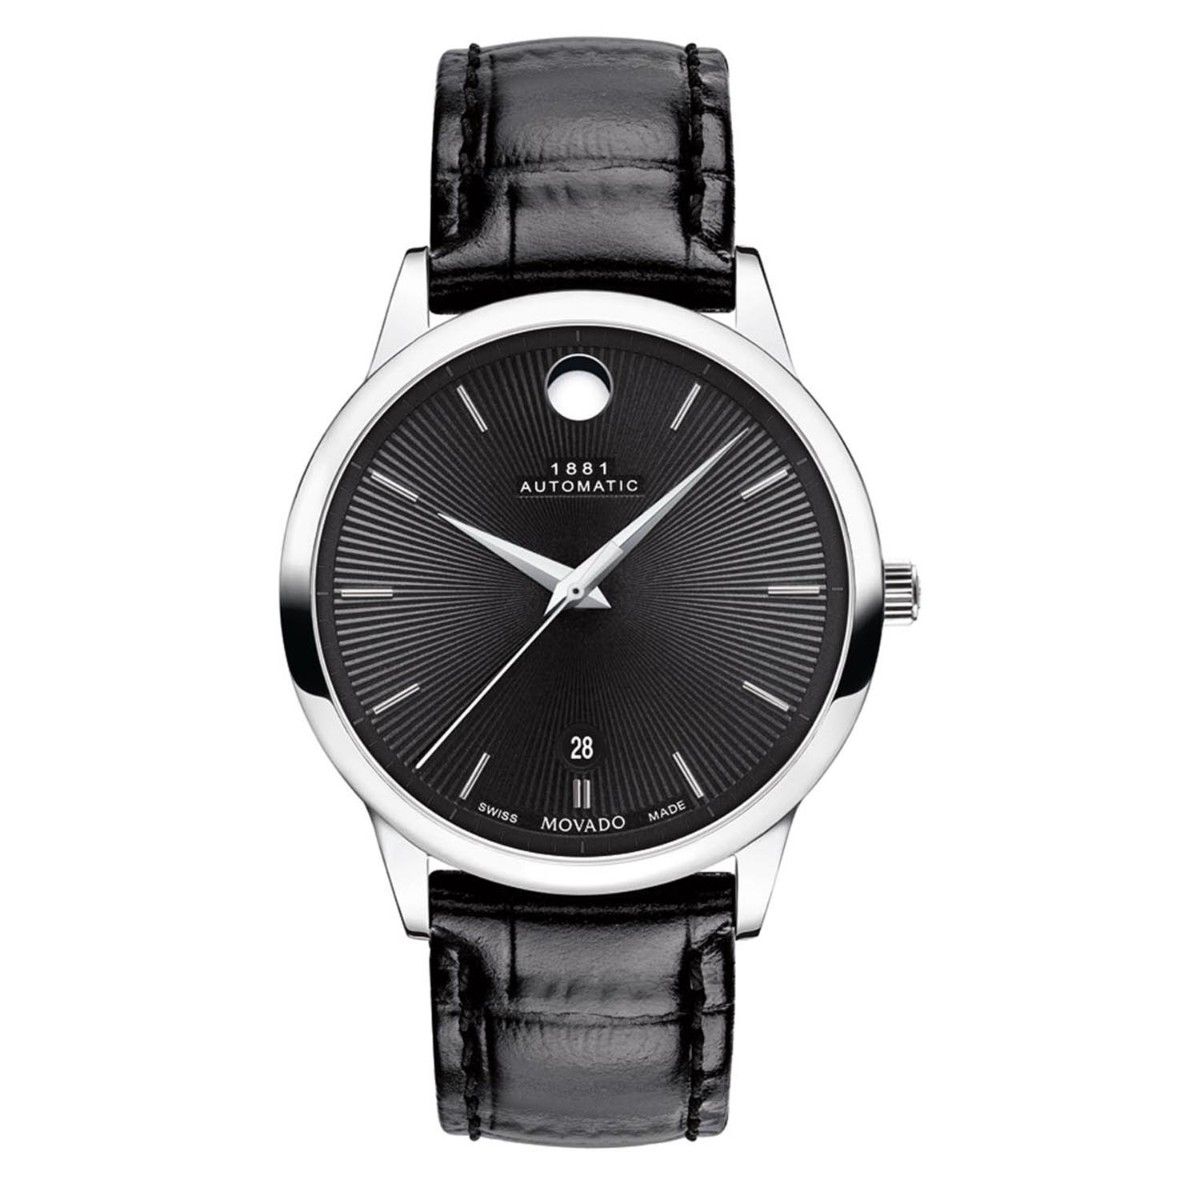 Buy Movado 1881 Automatic Black Round Dial Men Watch - 0607458 (M) Online